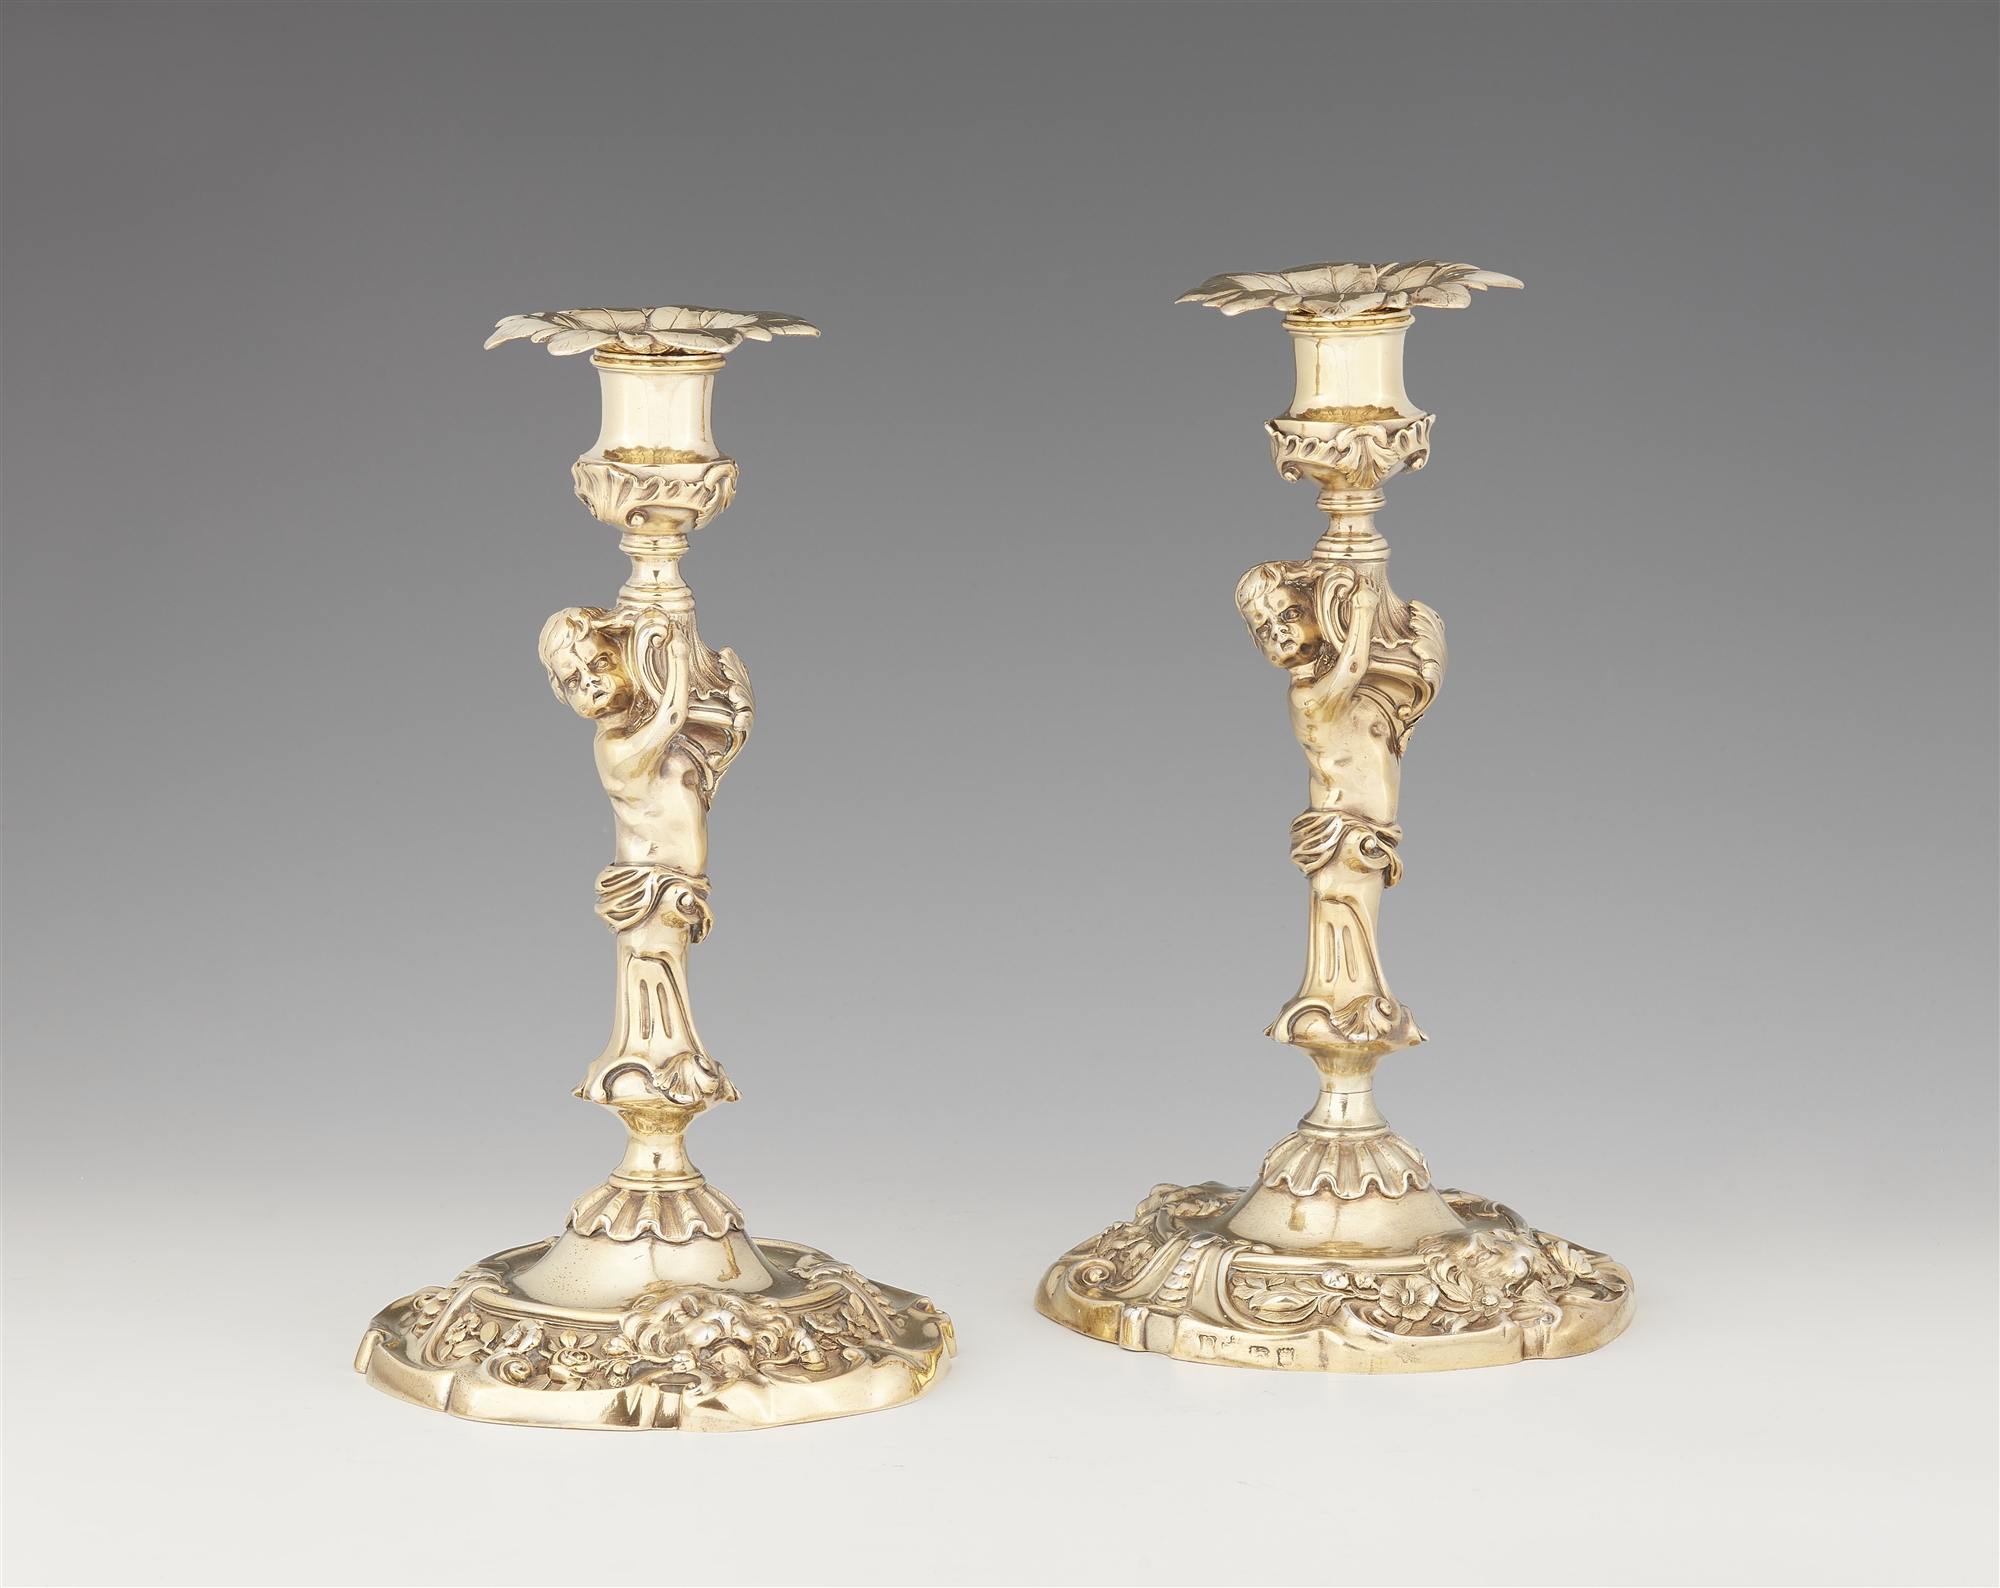 A pair of George II silver gilt candlesticks